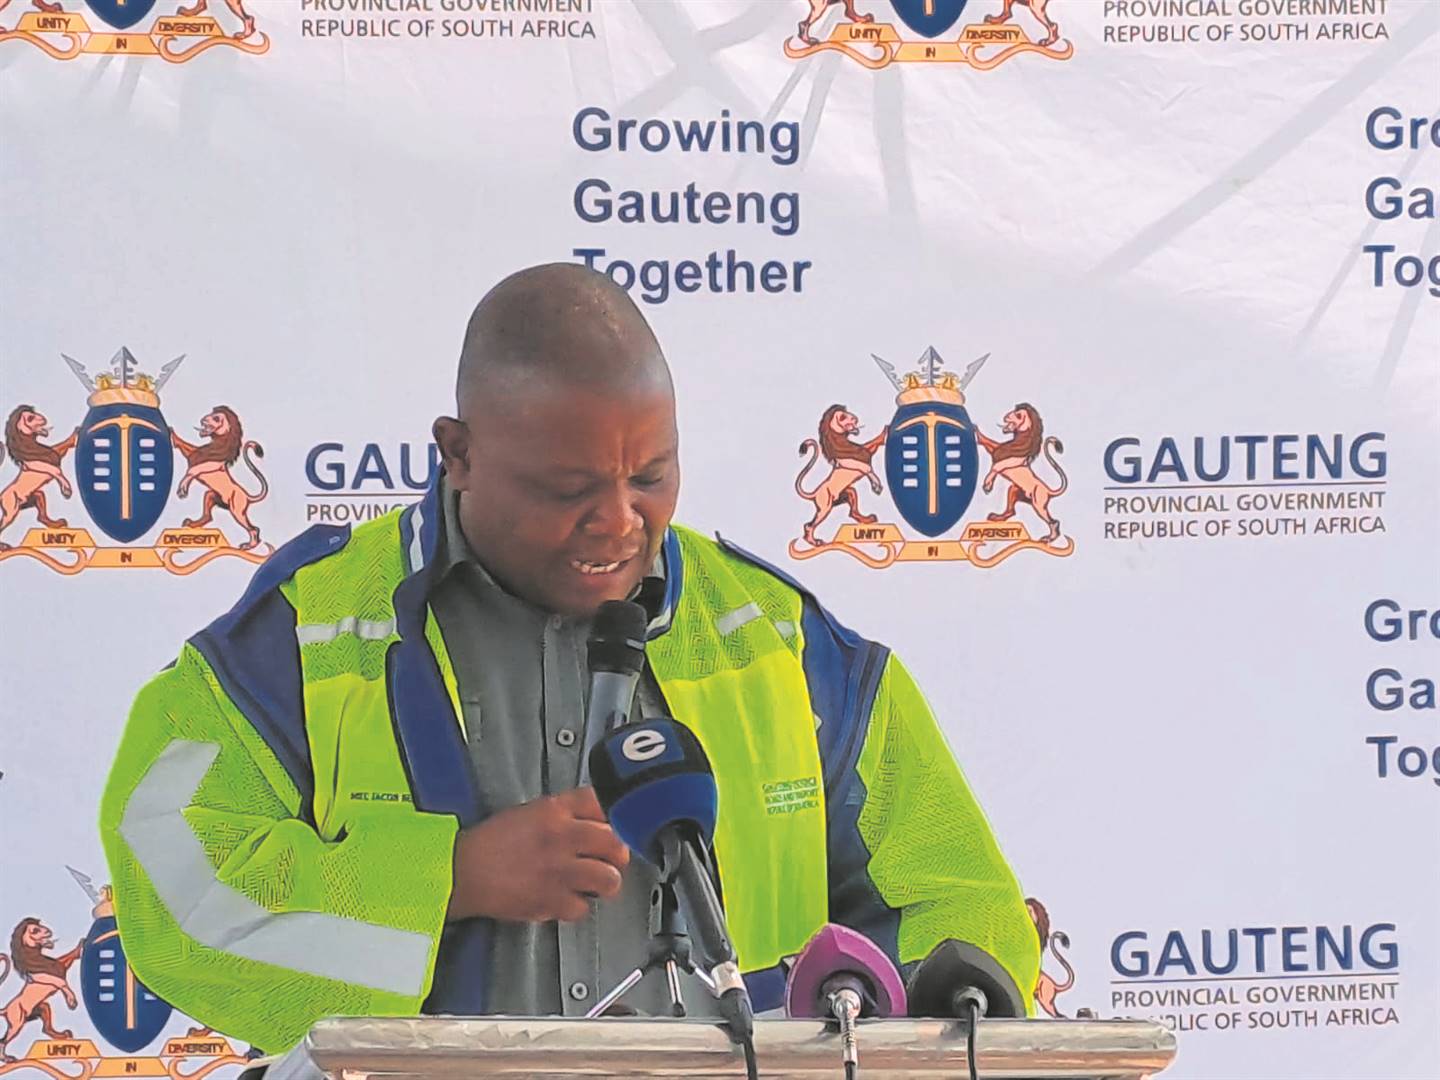 MEC Jacob Mamabolo wants all testing centres across Gauteng to operate without any corruption or fraud.